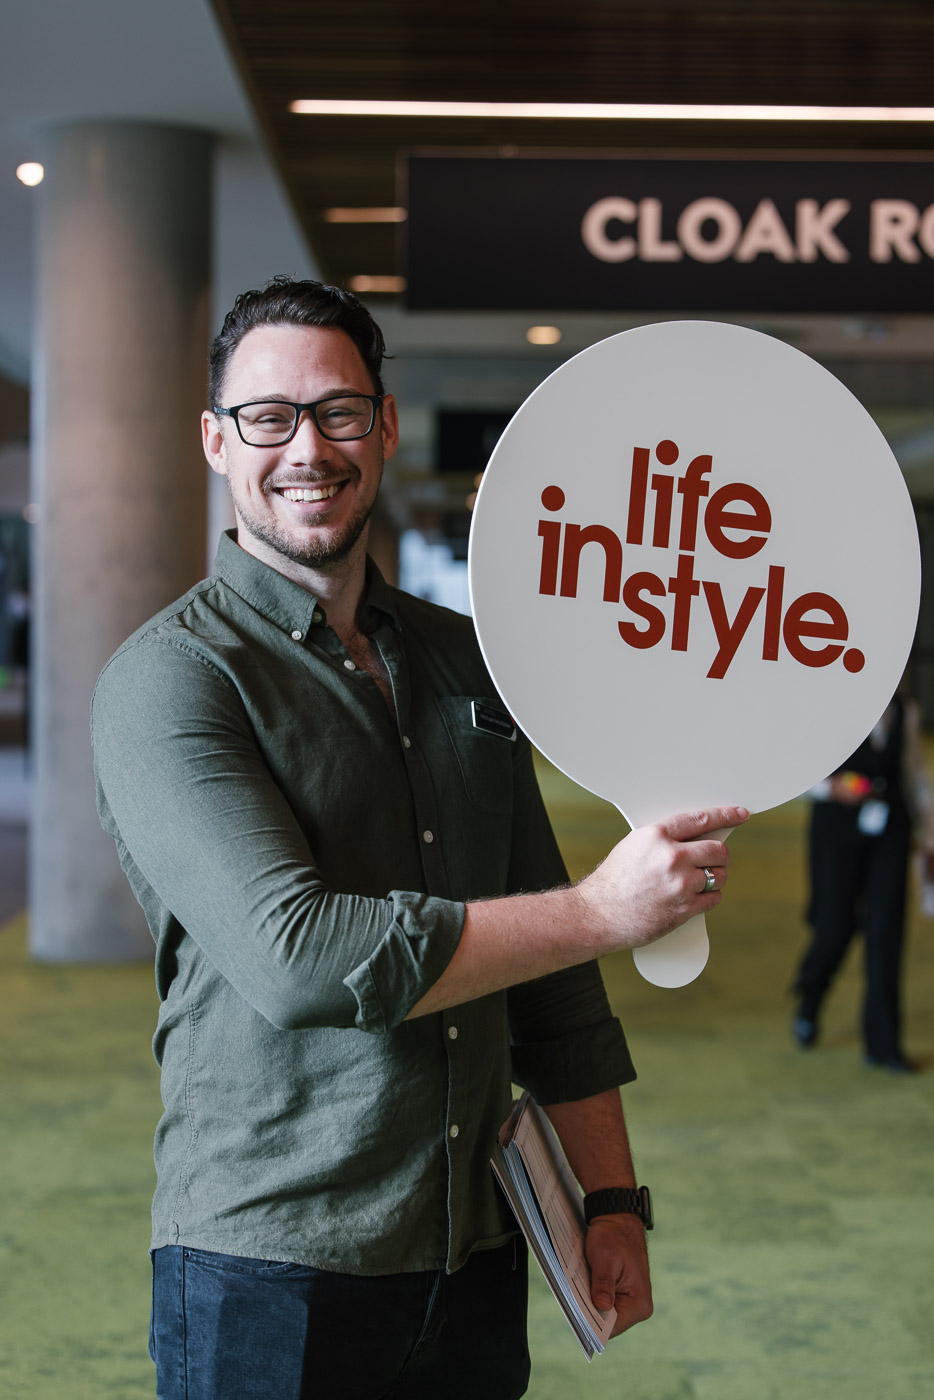 A male smiles at the camera holding a sign with the Life Instyle logo as a form of direction to arriving attendees